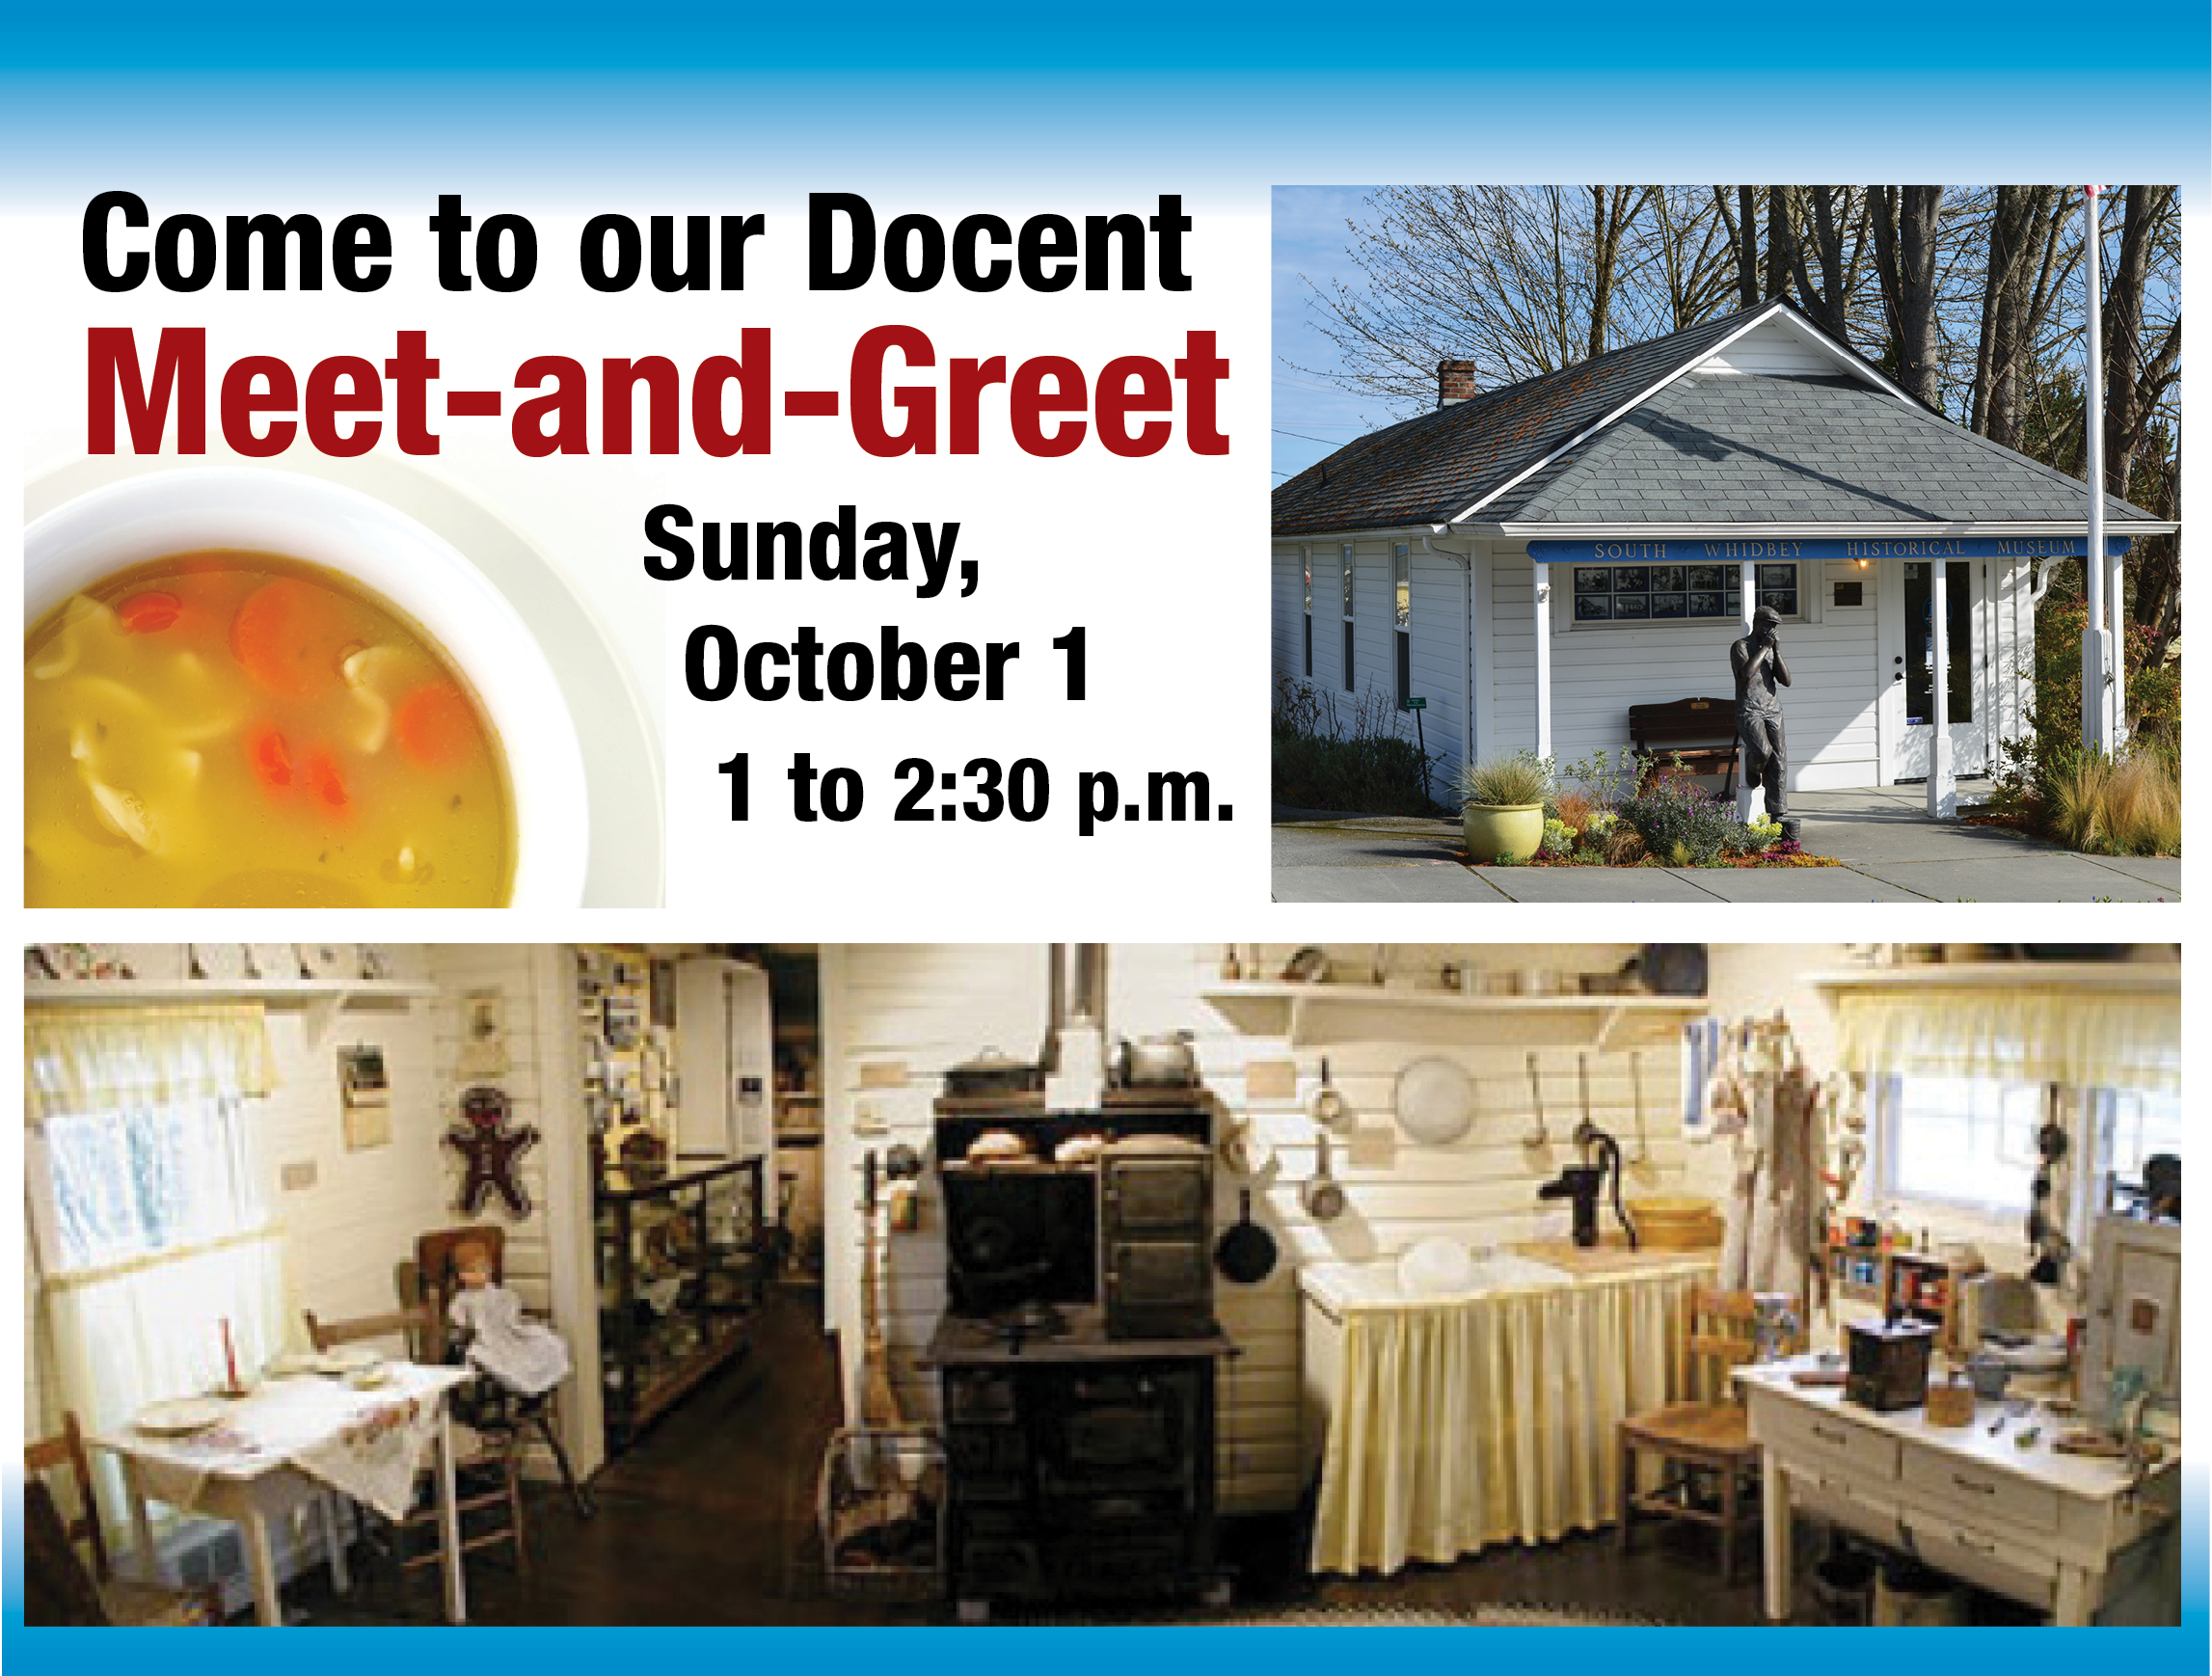 Docent Meet-and-Greet on Sunday, October 1 at the Museum